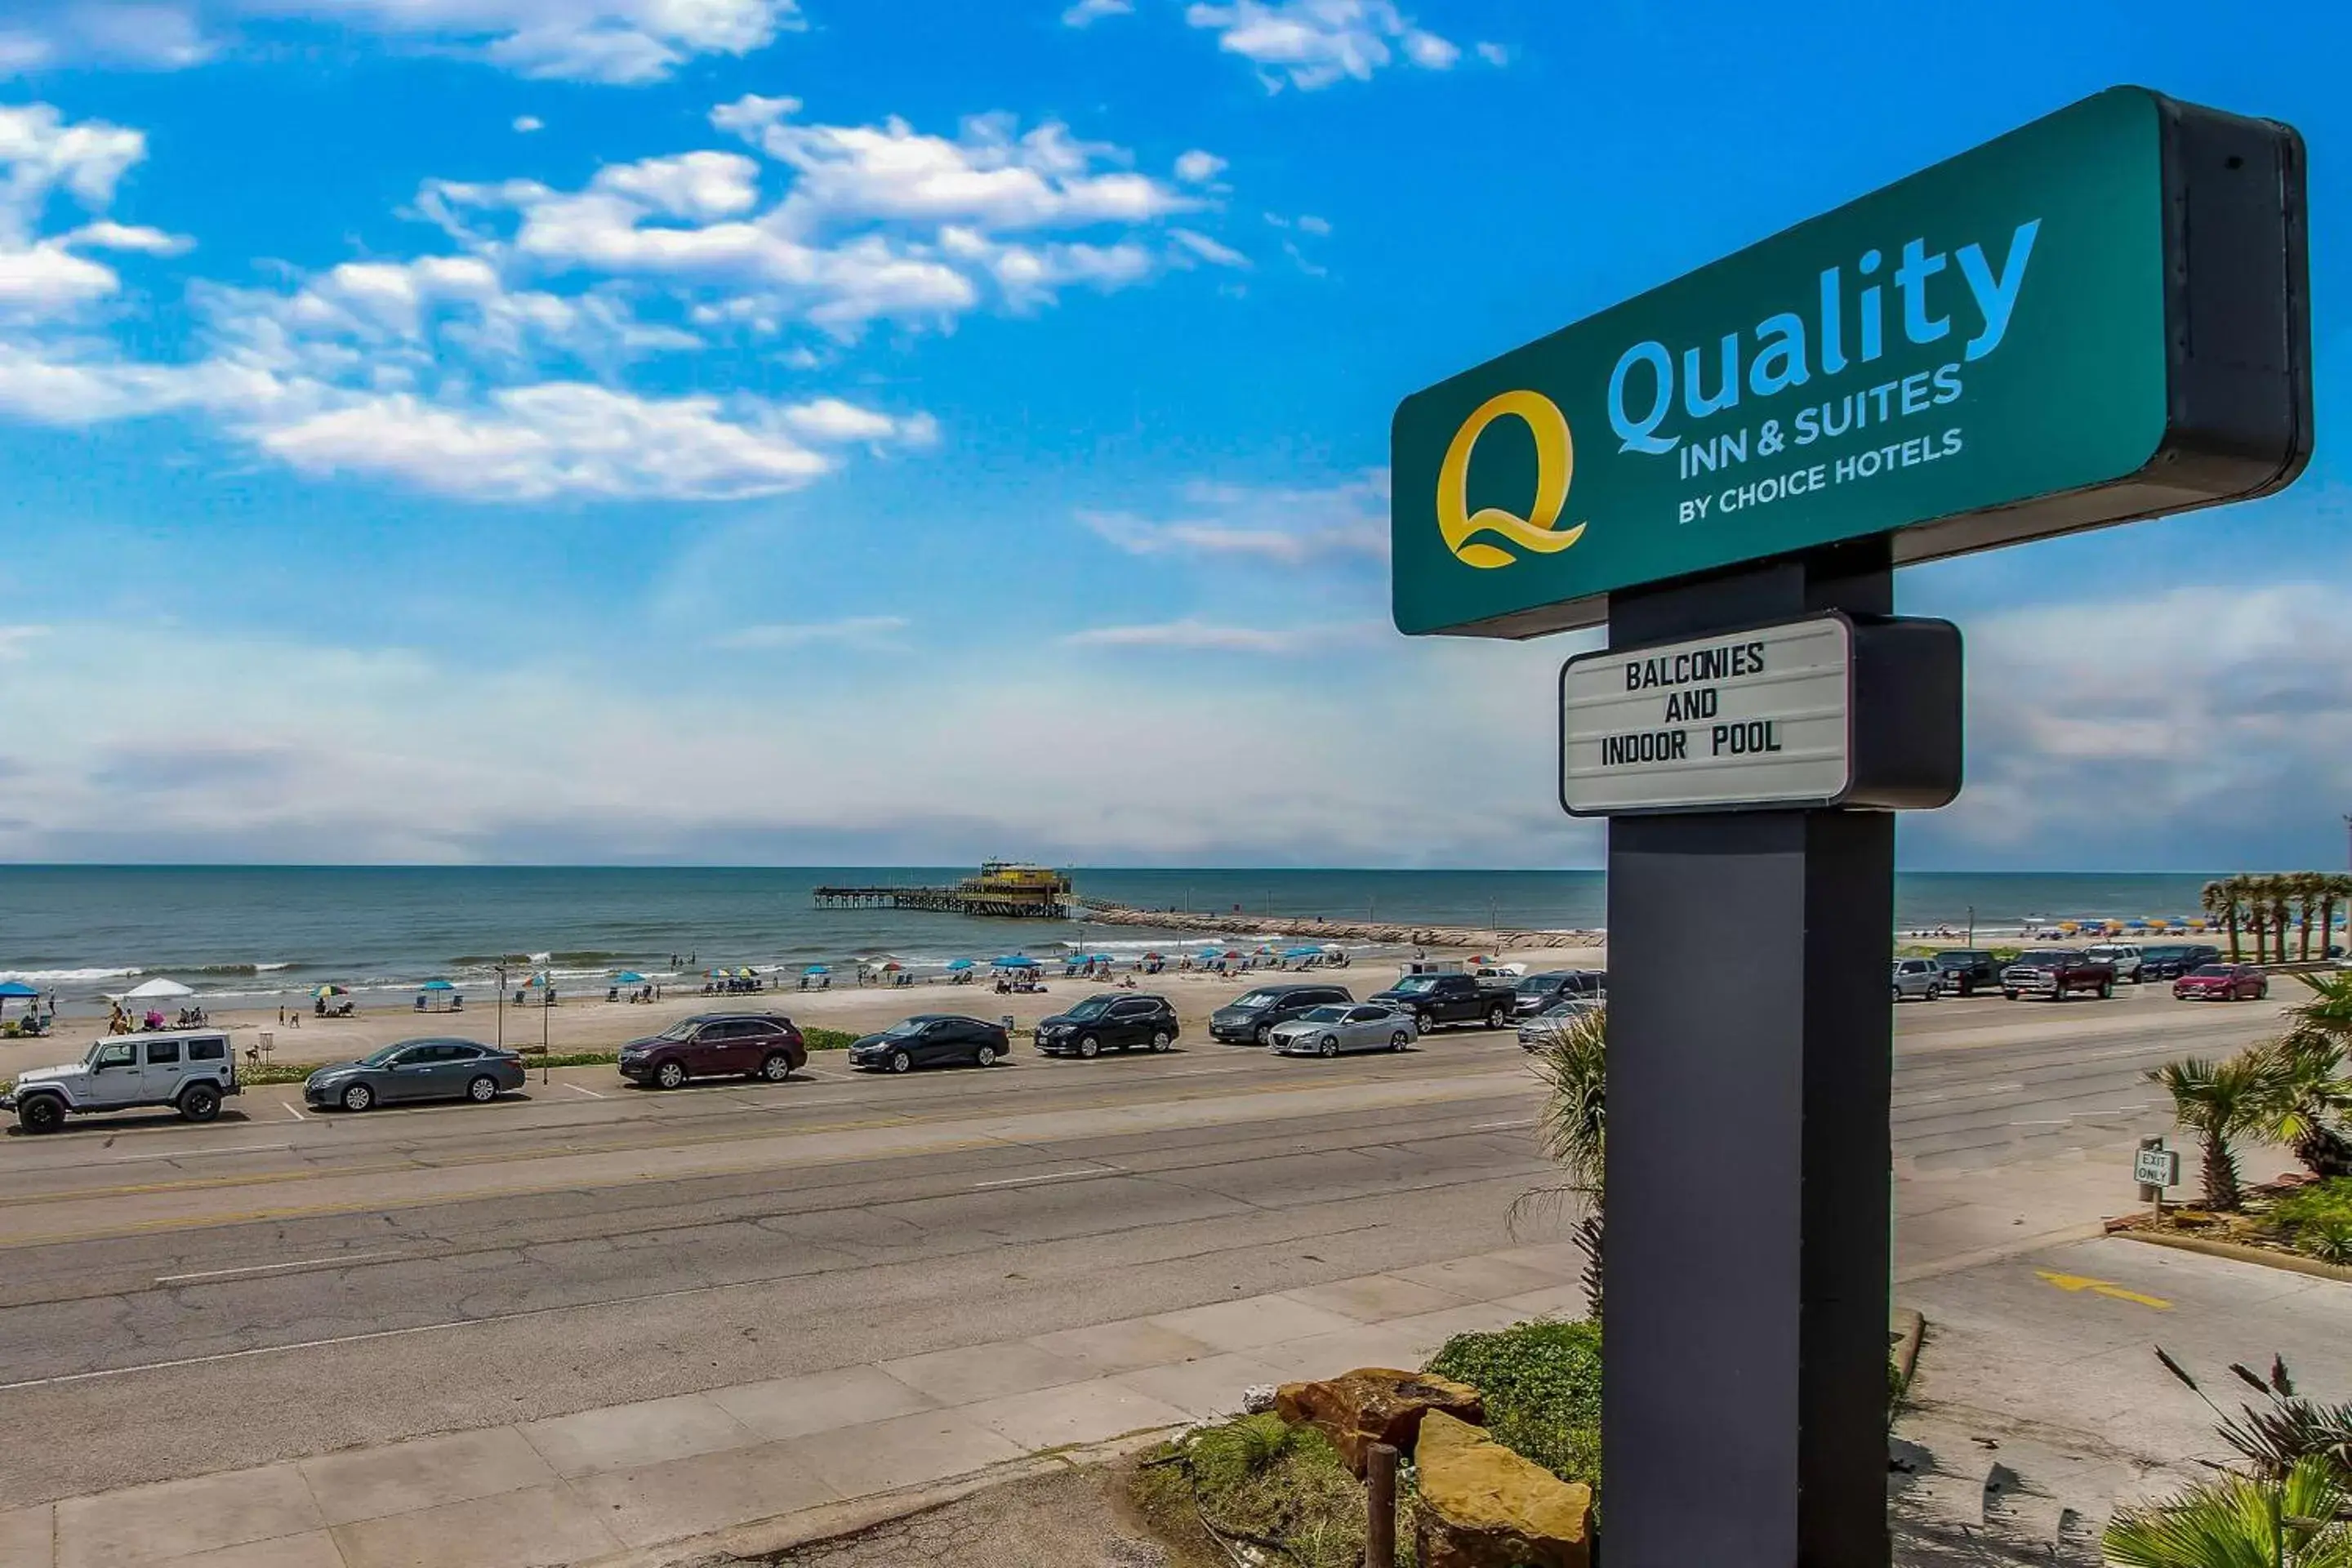 Property building in Quality Inn & Suites Beachfront